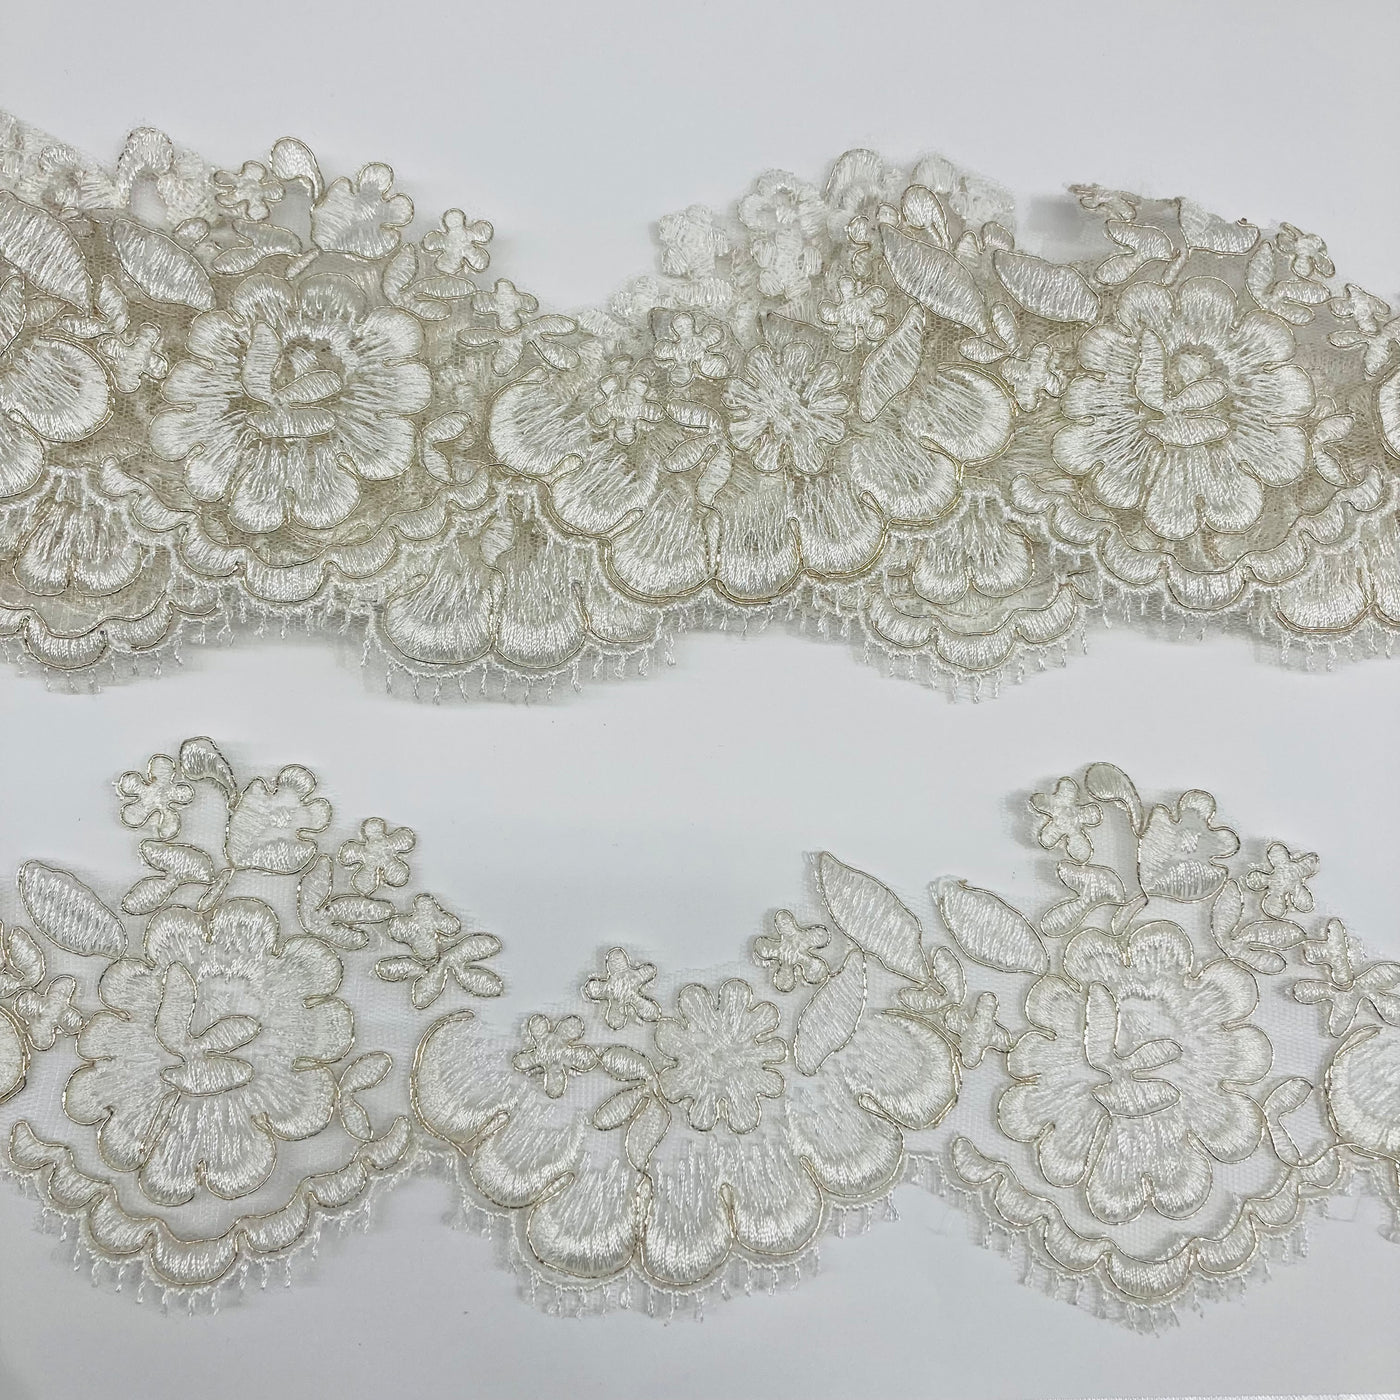 Corded Ivory with Silver Trimming Embroidered on 100% Polyester Net Mesh. Lace Usa